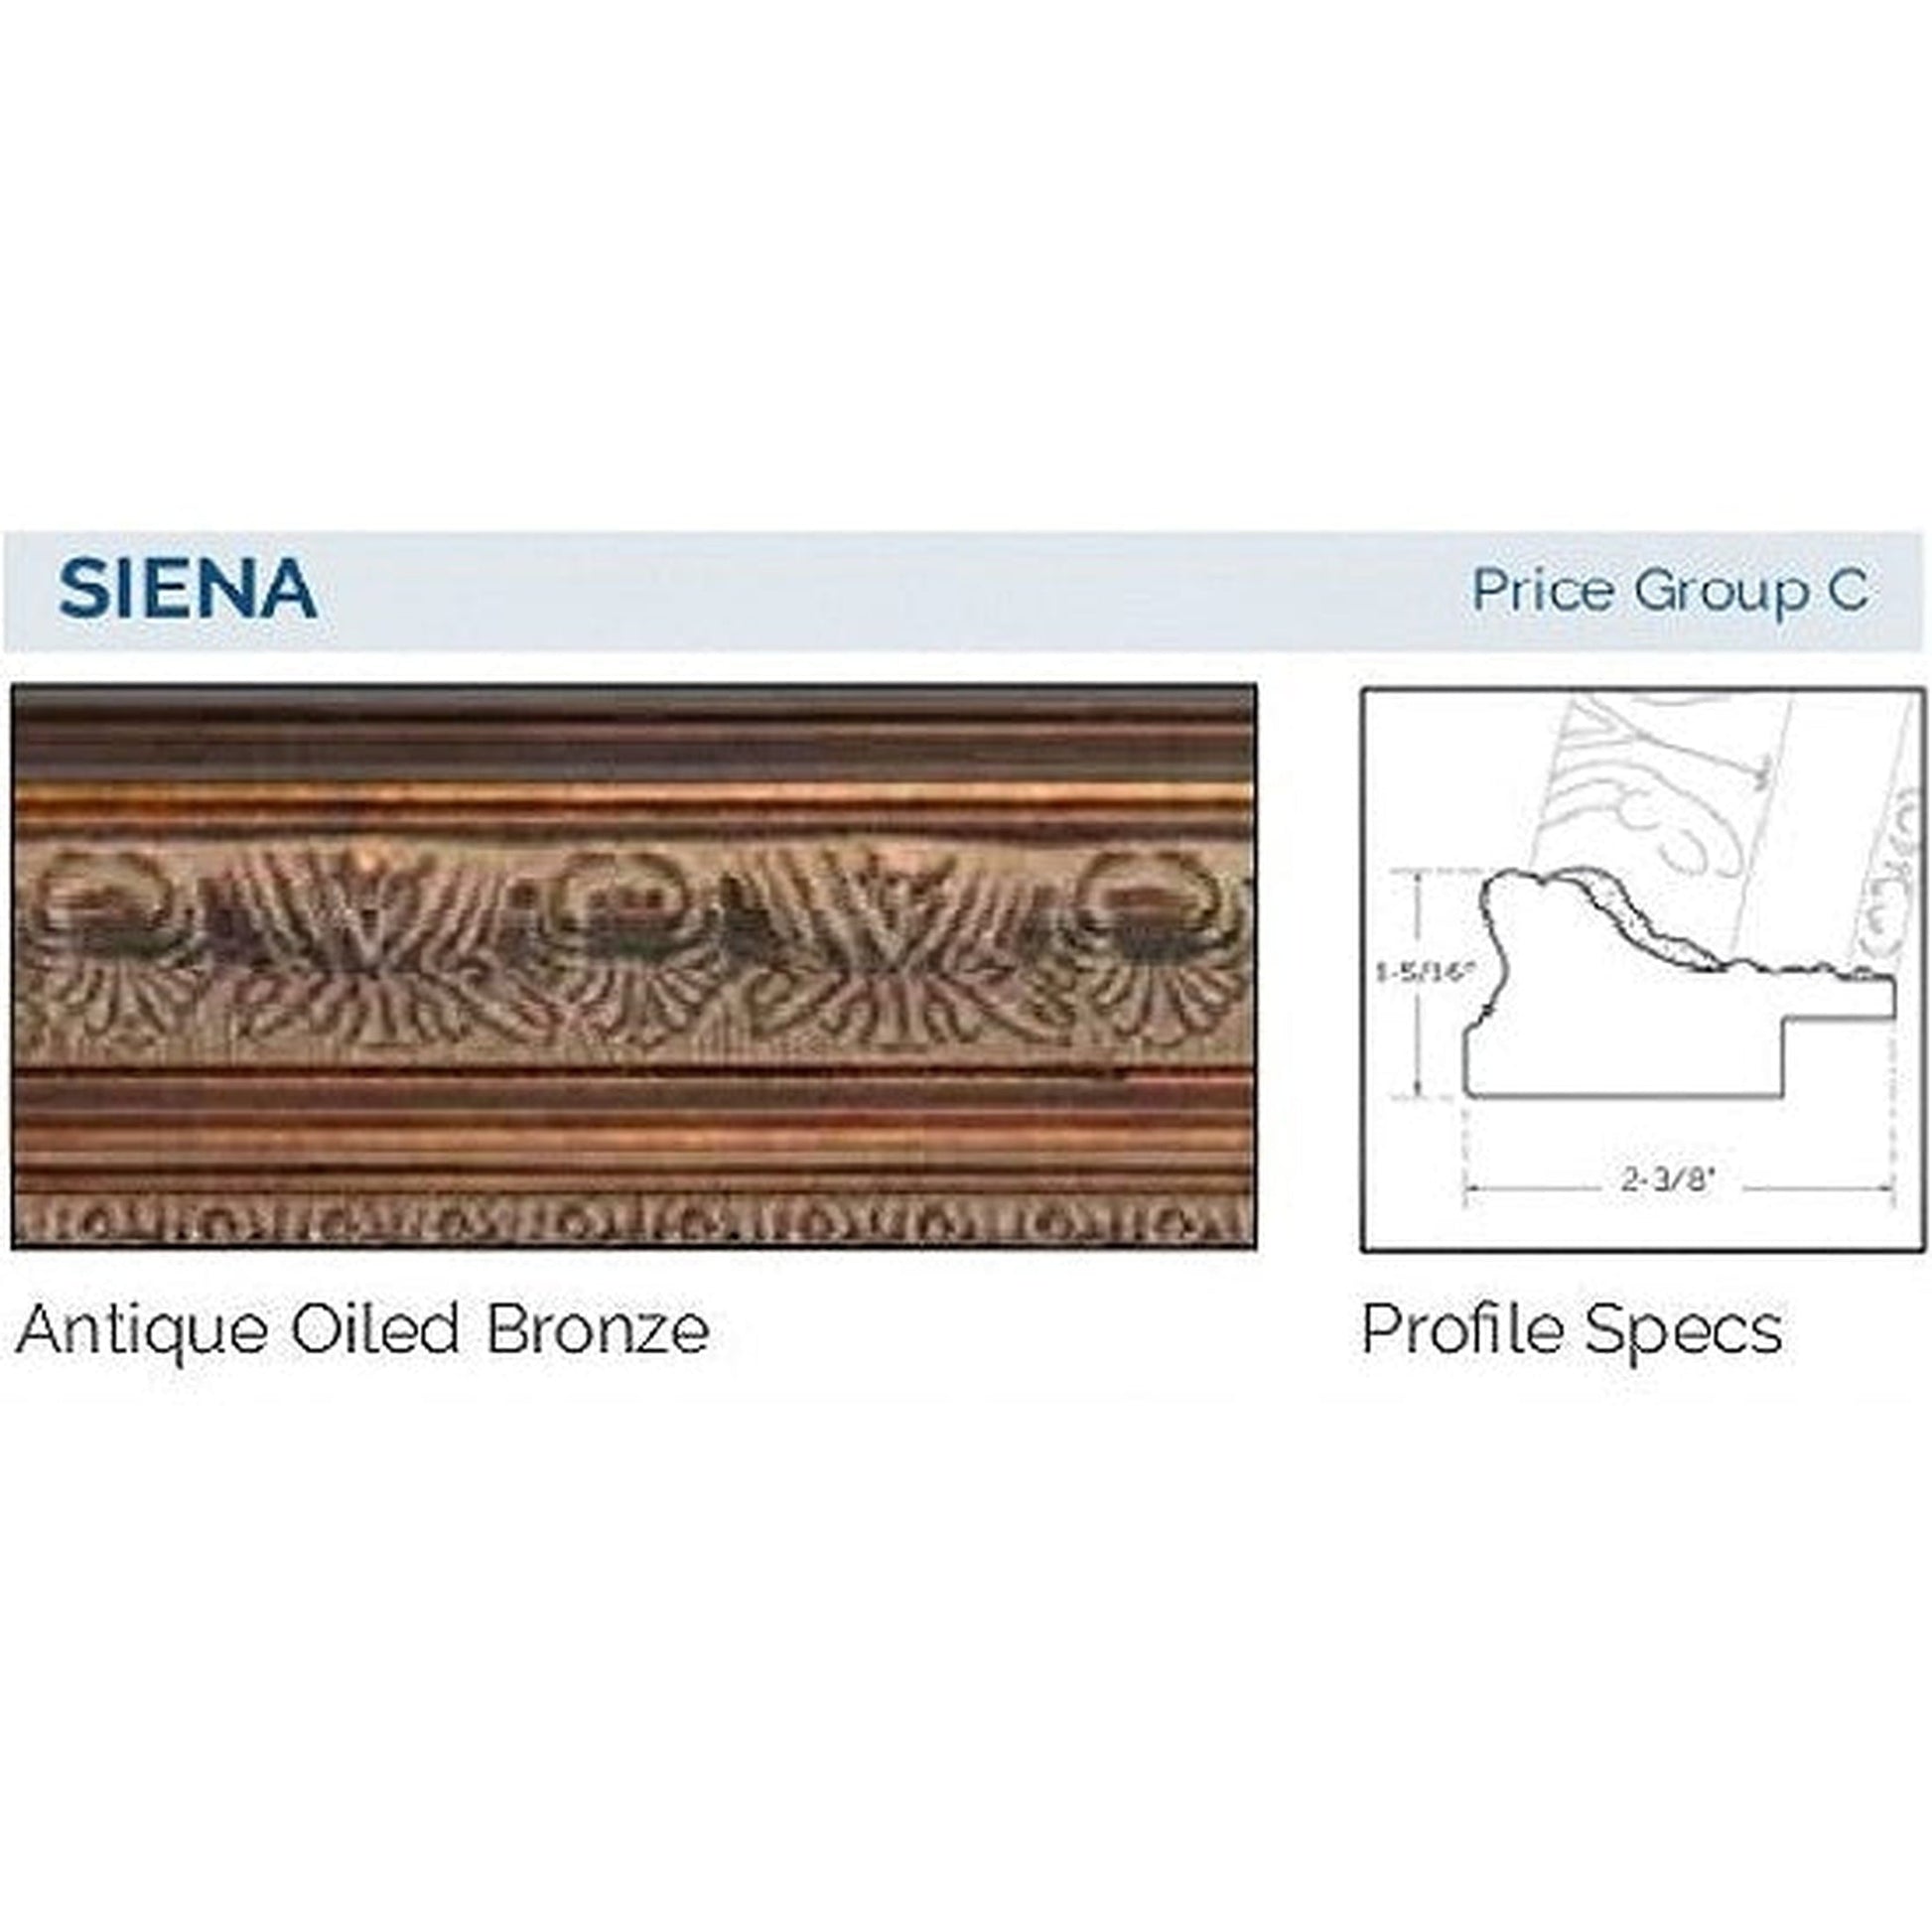 Afina Signature 16" x 22" Siena Oiled Bronze Framed Mirror With Beveled Edge